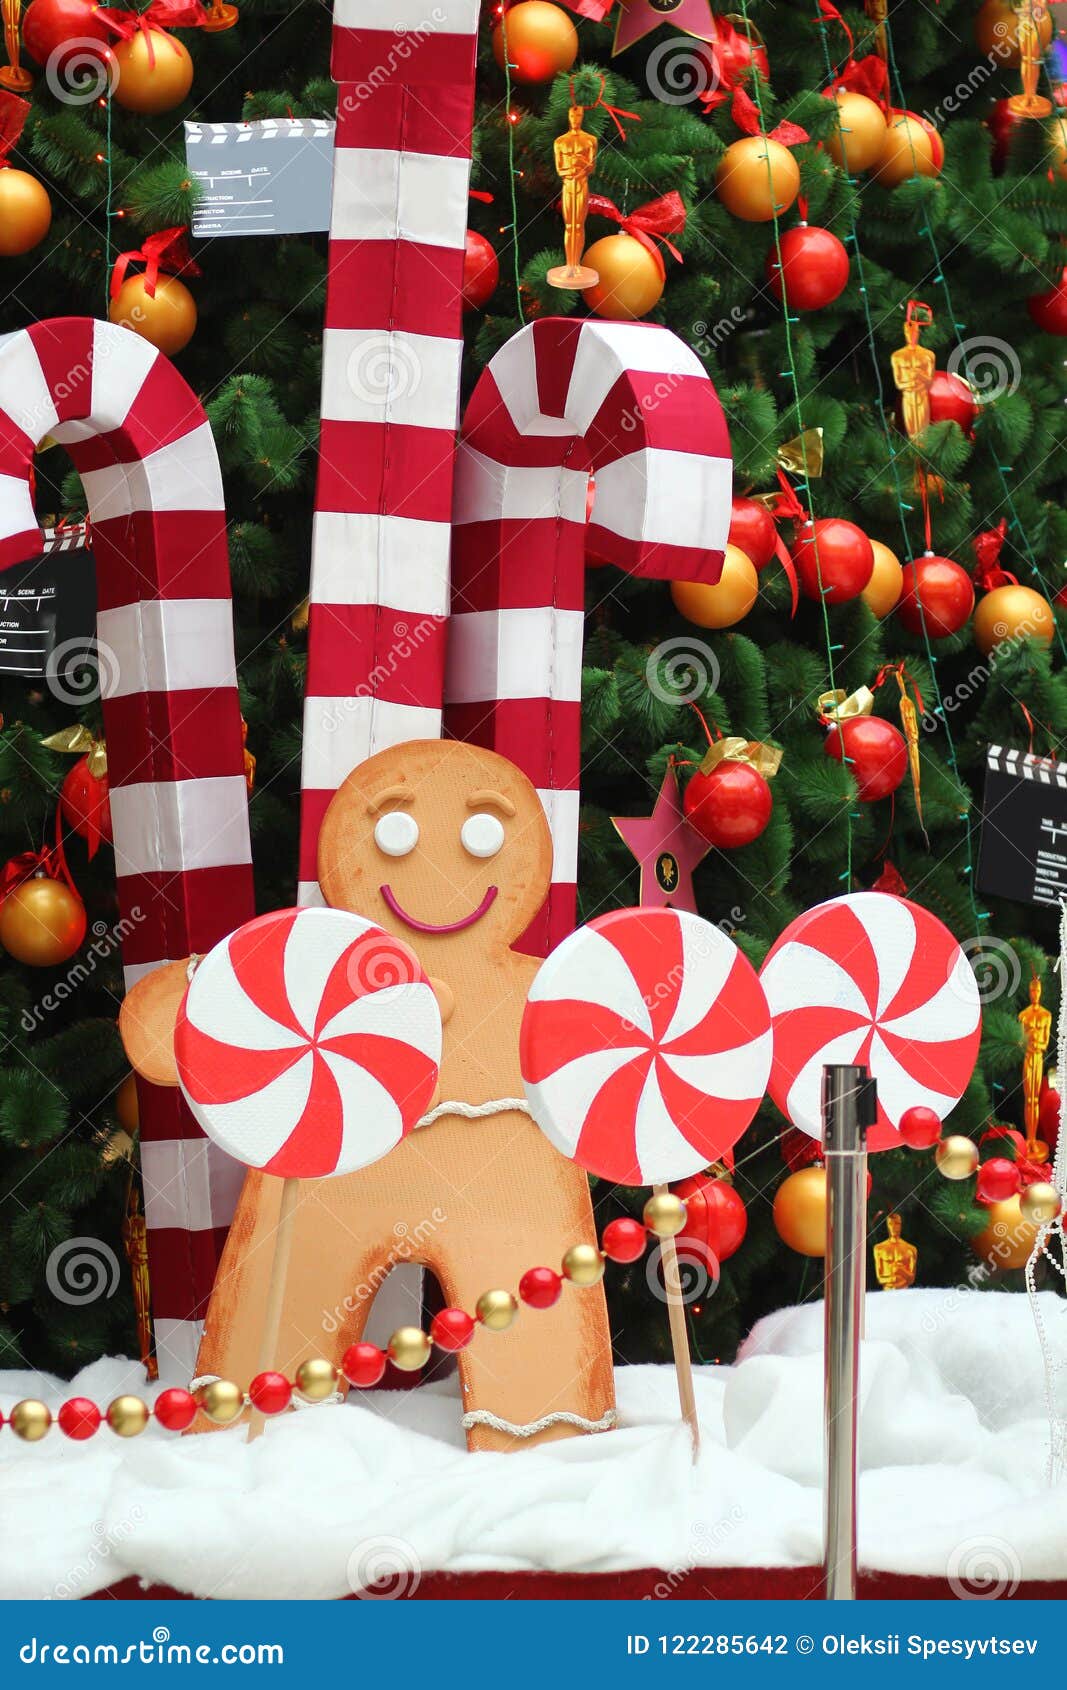 Christmas Tree Decoration Giant Gingerbread Man Candy Canes And